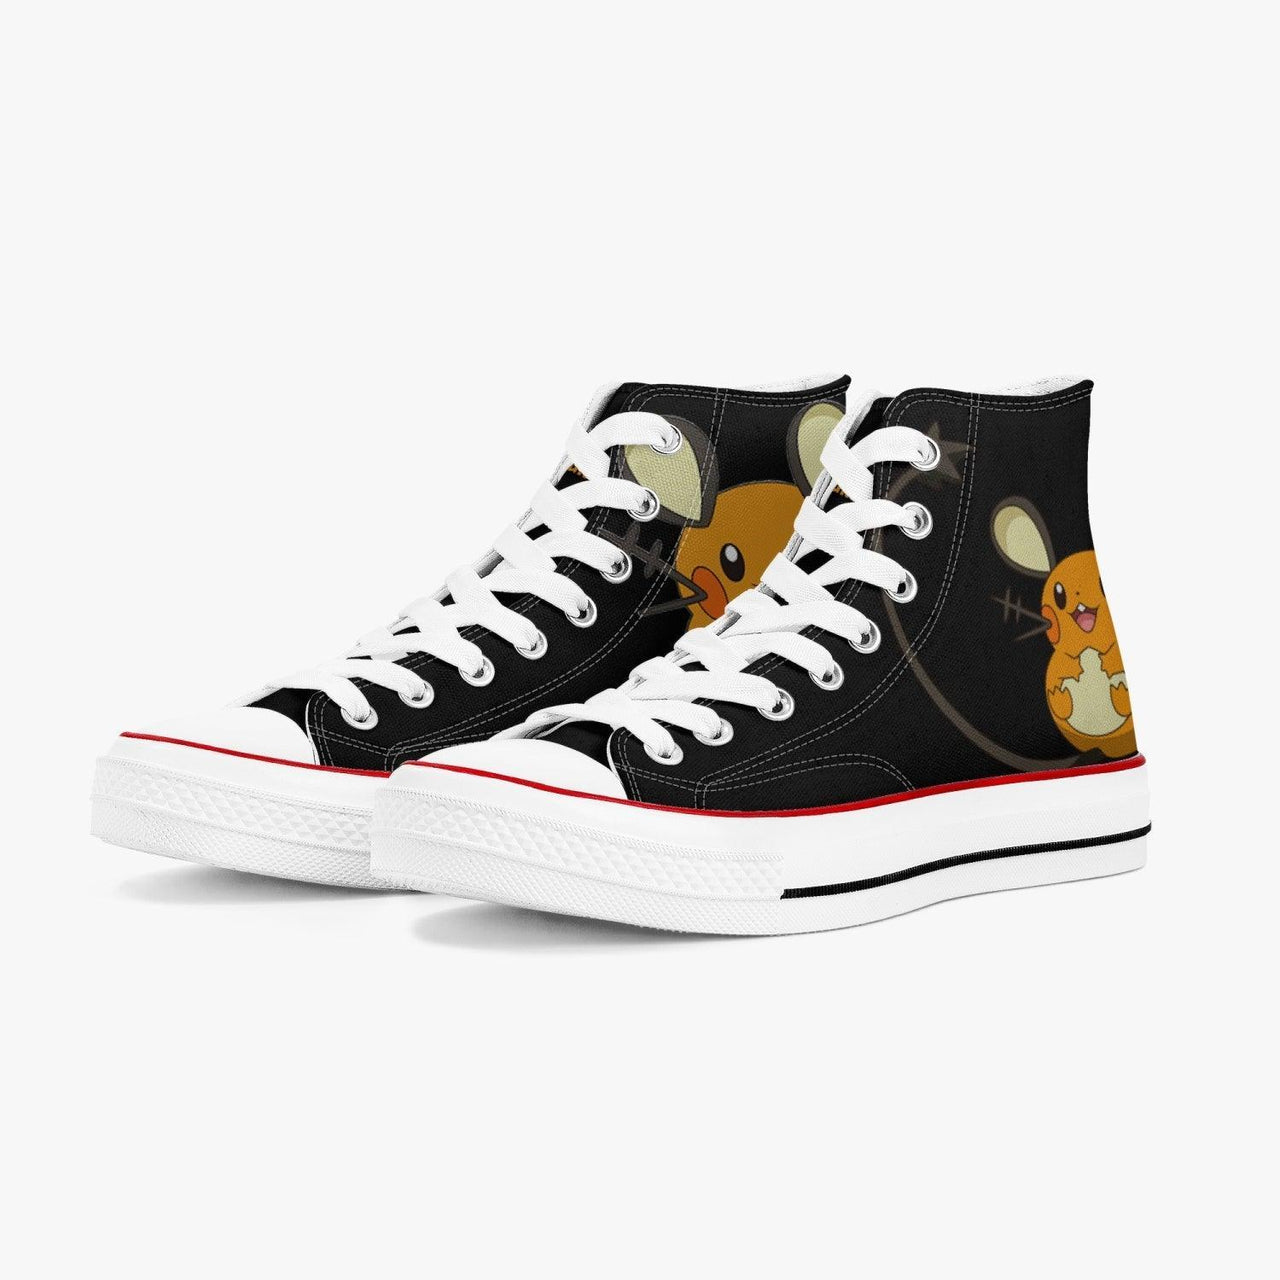 Converse All Star 100th Anniversary One Piece Pt Hi Sneakers | Japan Trend  Shop